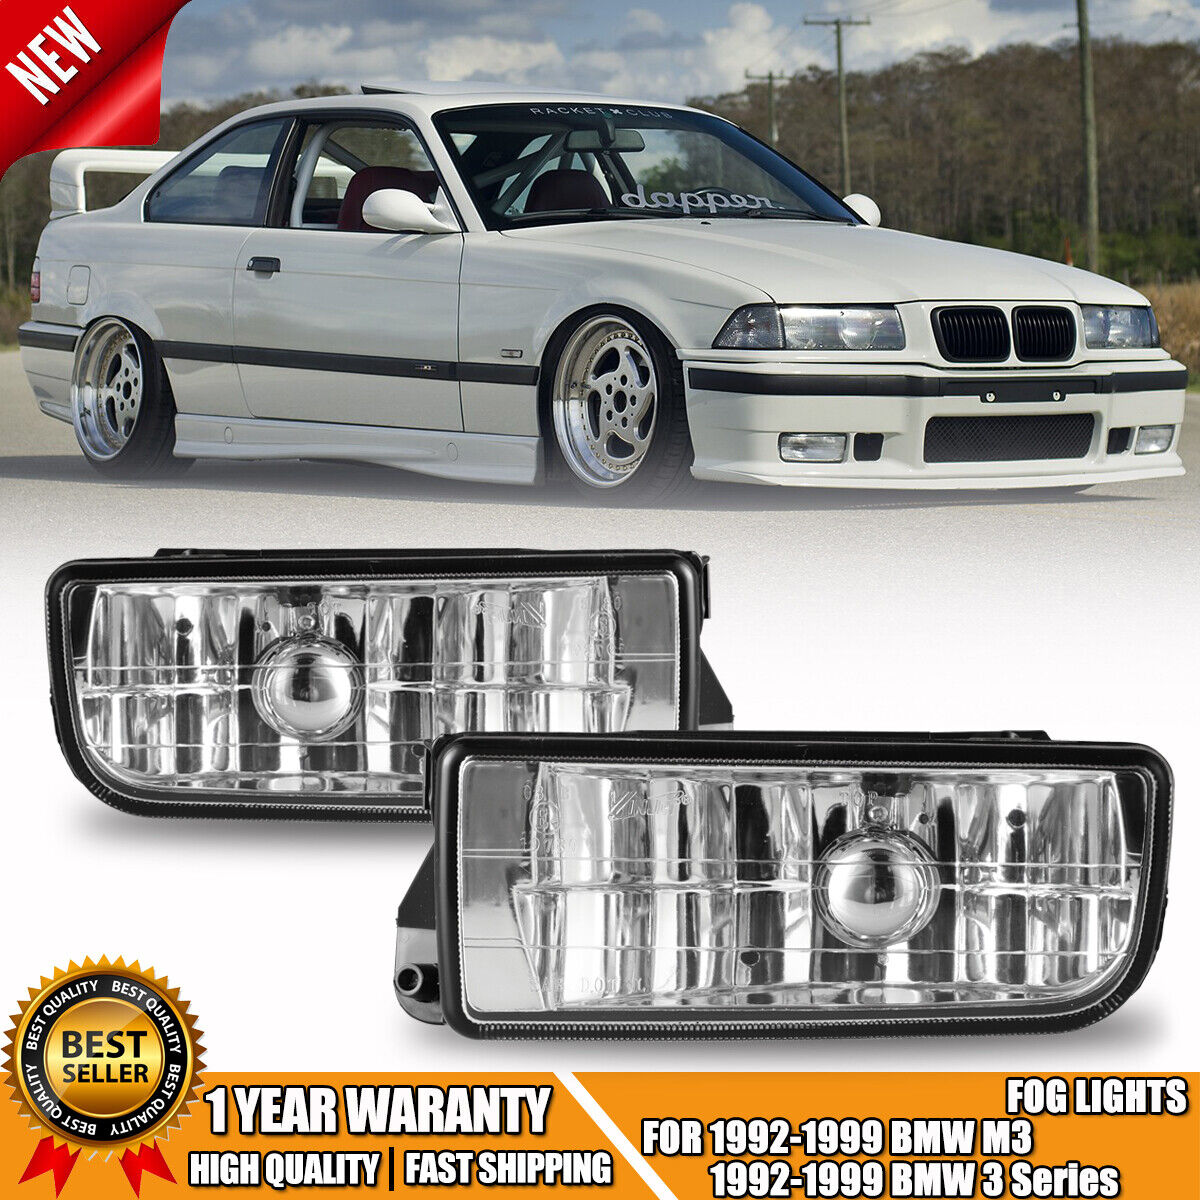 Fog Lights For 92-99 BMW E36/M3 3 Series Clear Glass Lens with Bulbs H1 55W Pair